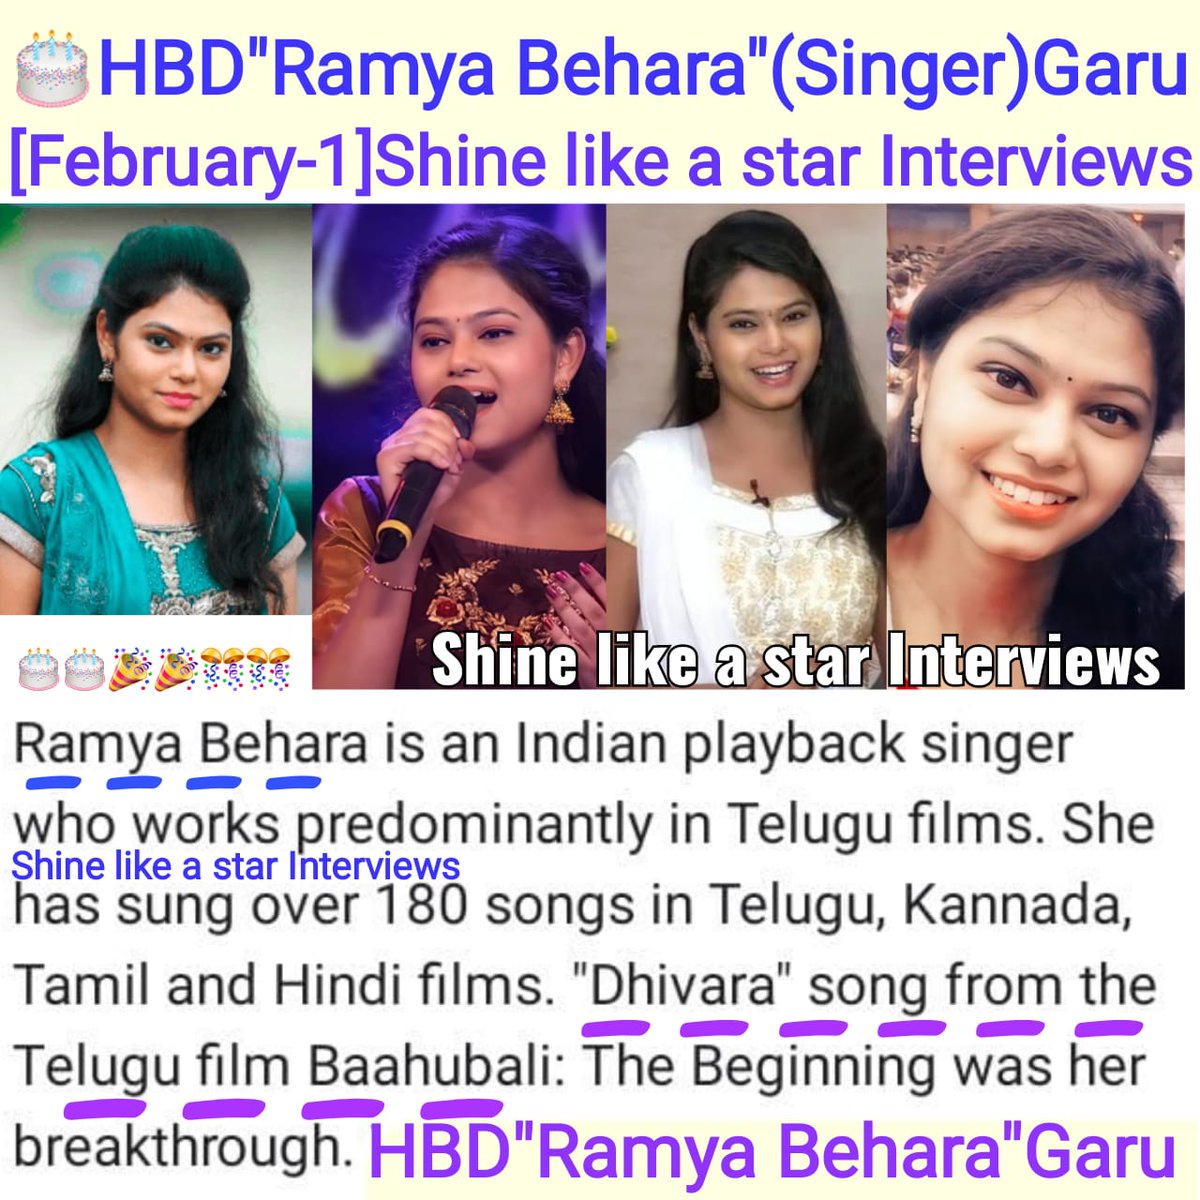 #Shinelikeastarinterviews  wishes #HBD #singer #RamyaBehara   Garu  #February1st  #febraury1    Wish you a happy birthday to you  from our #Shinelikeastarinterviews #youtubechannel we wish you all the successful journey to ur entire career TQ 🎂🎂🎊🎊🎉🎉